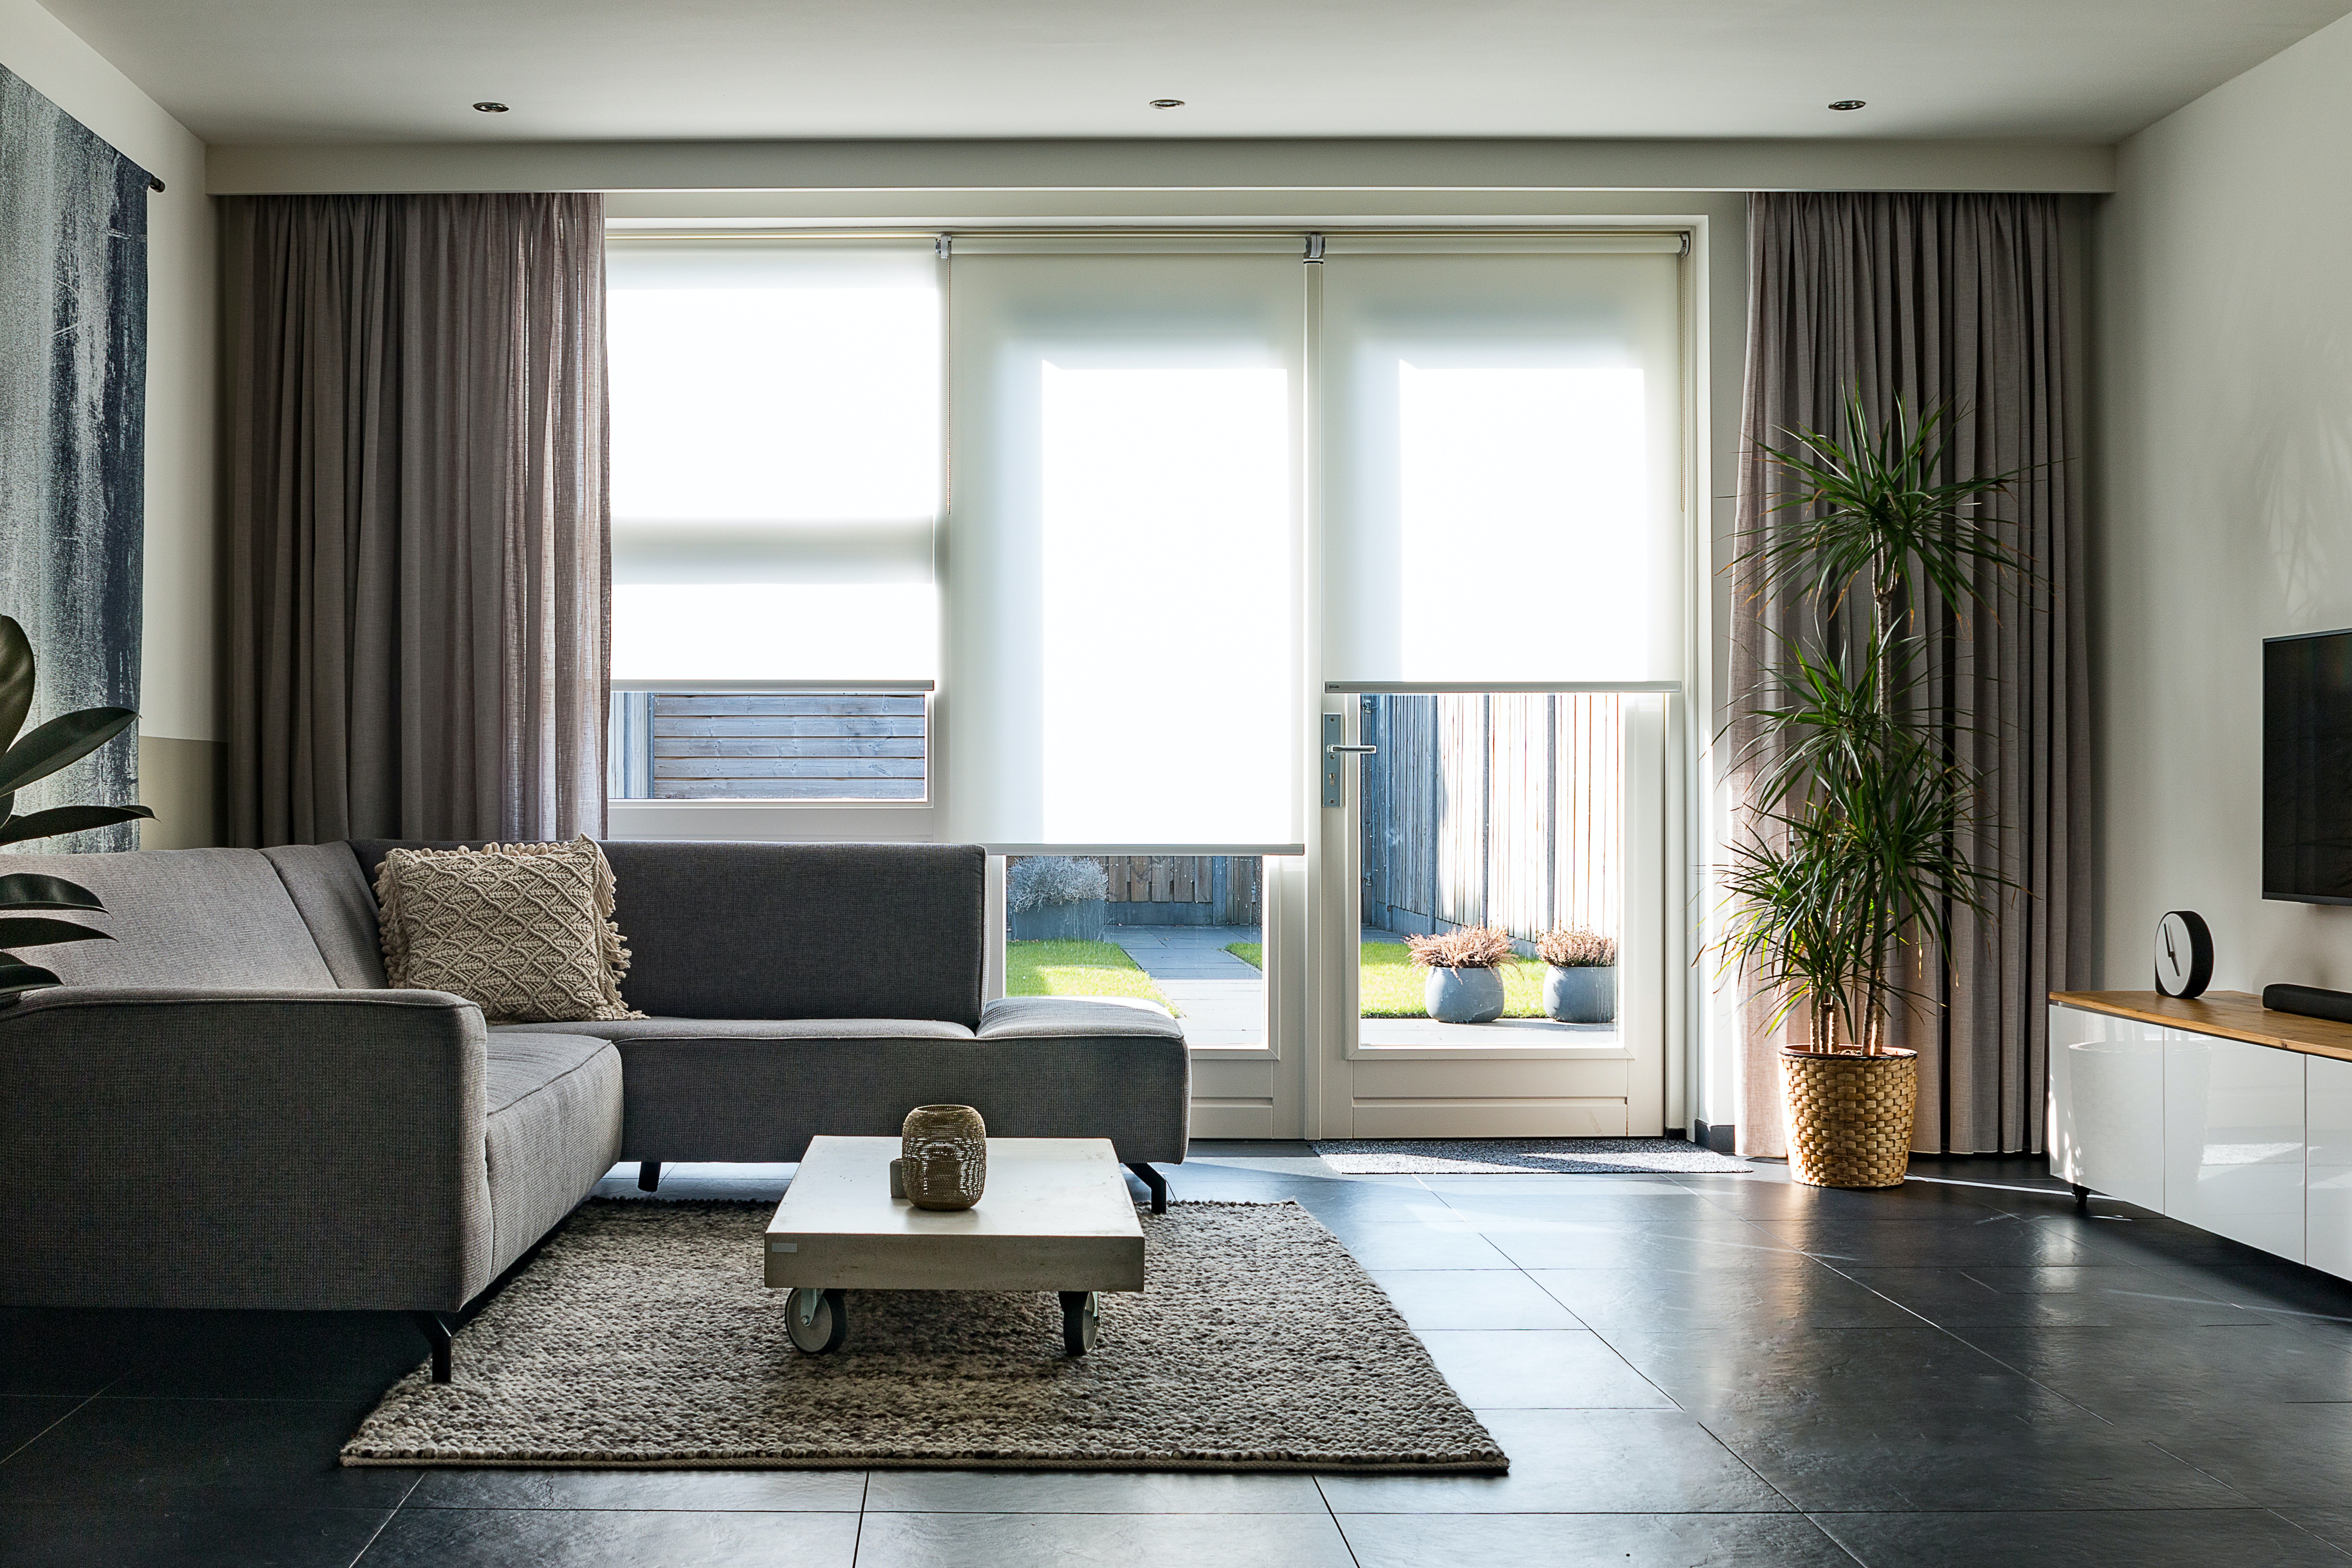 a living room with white shades and gray drapes